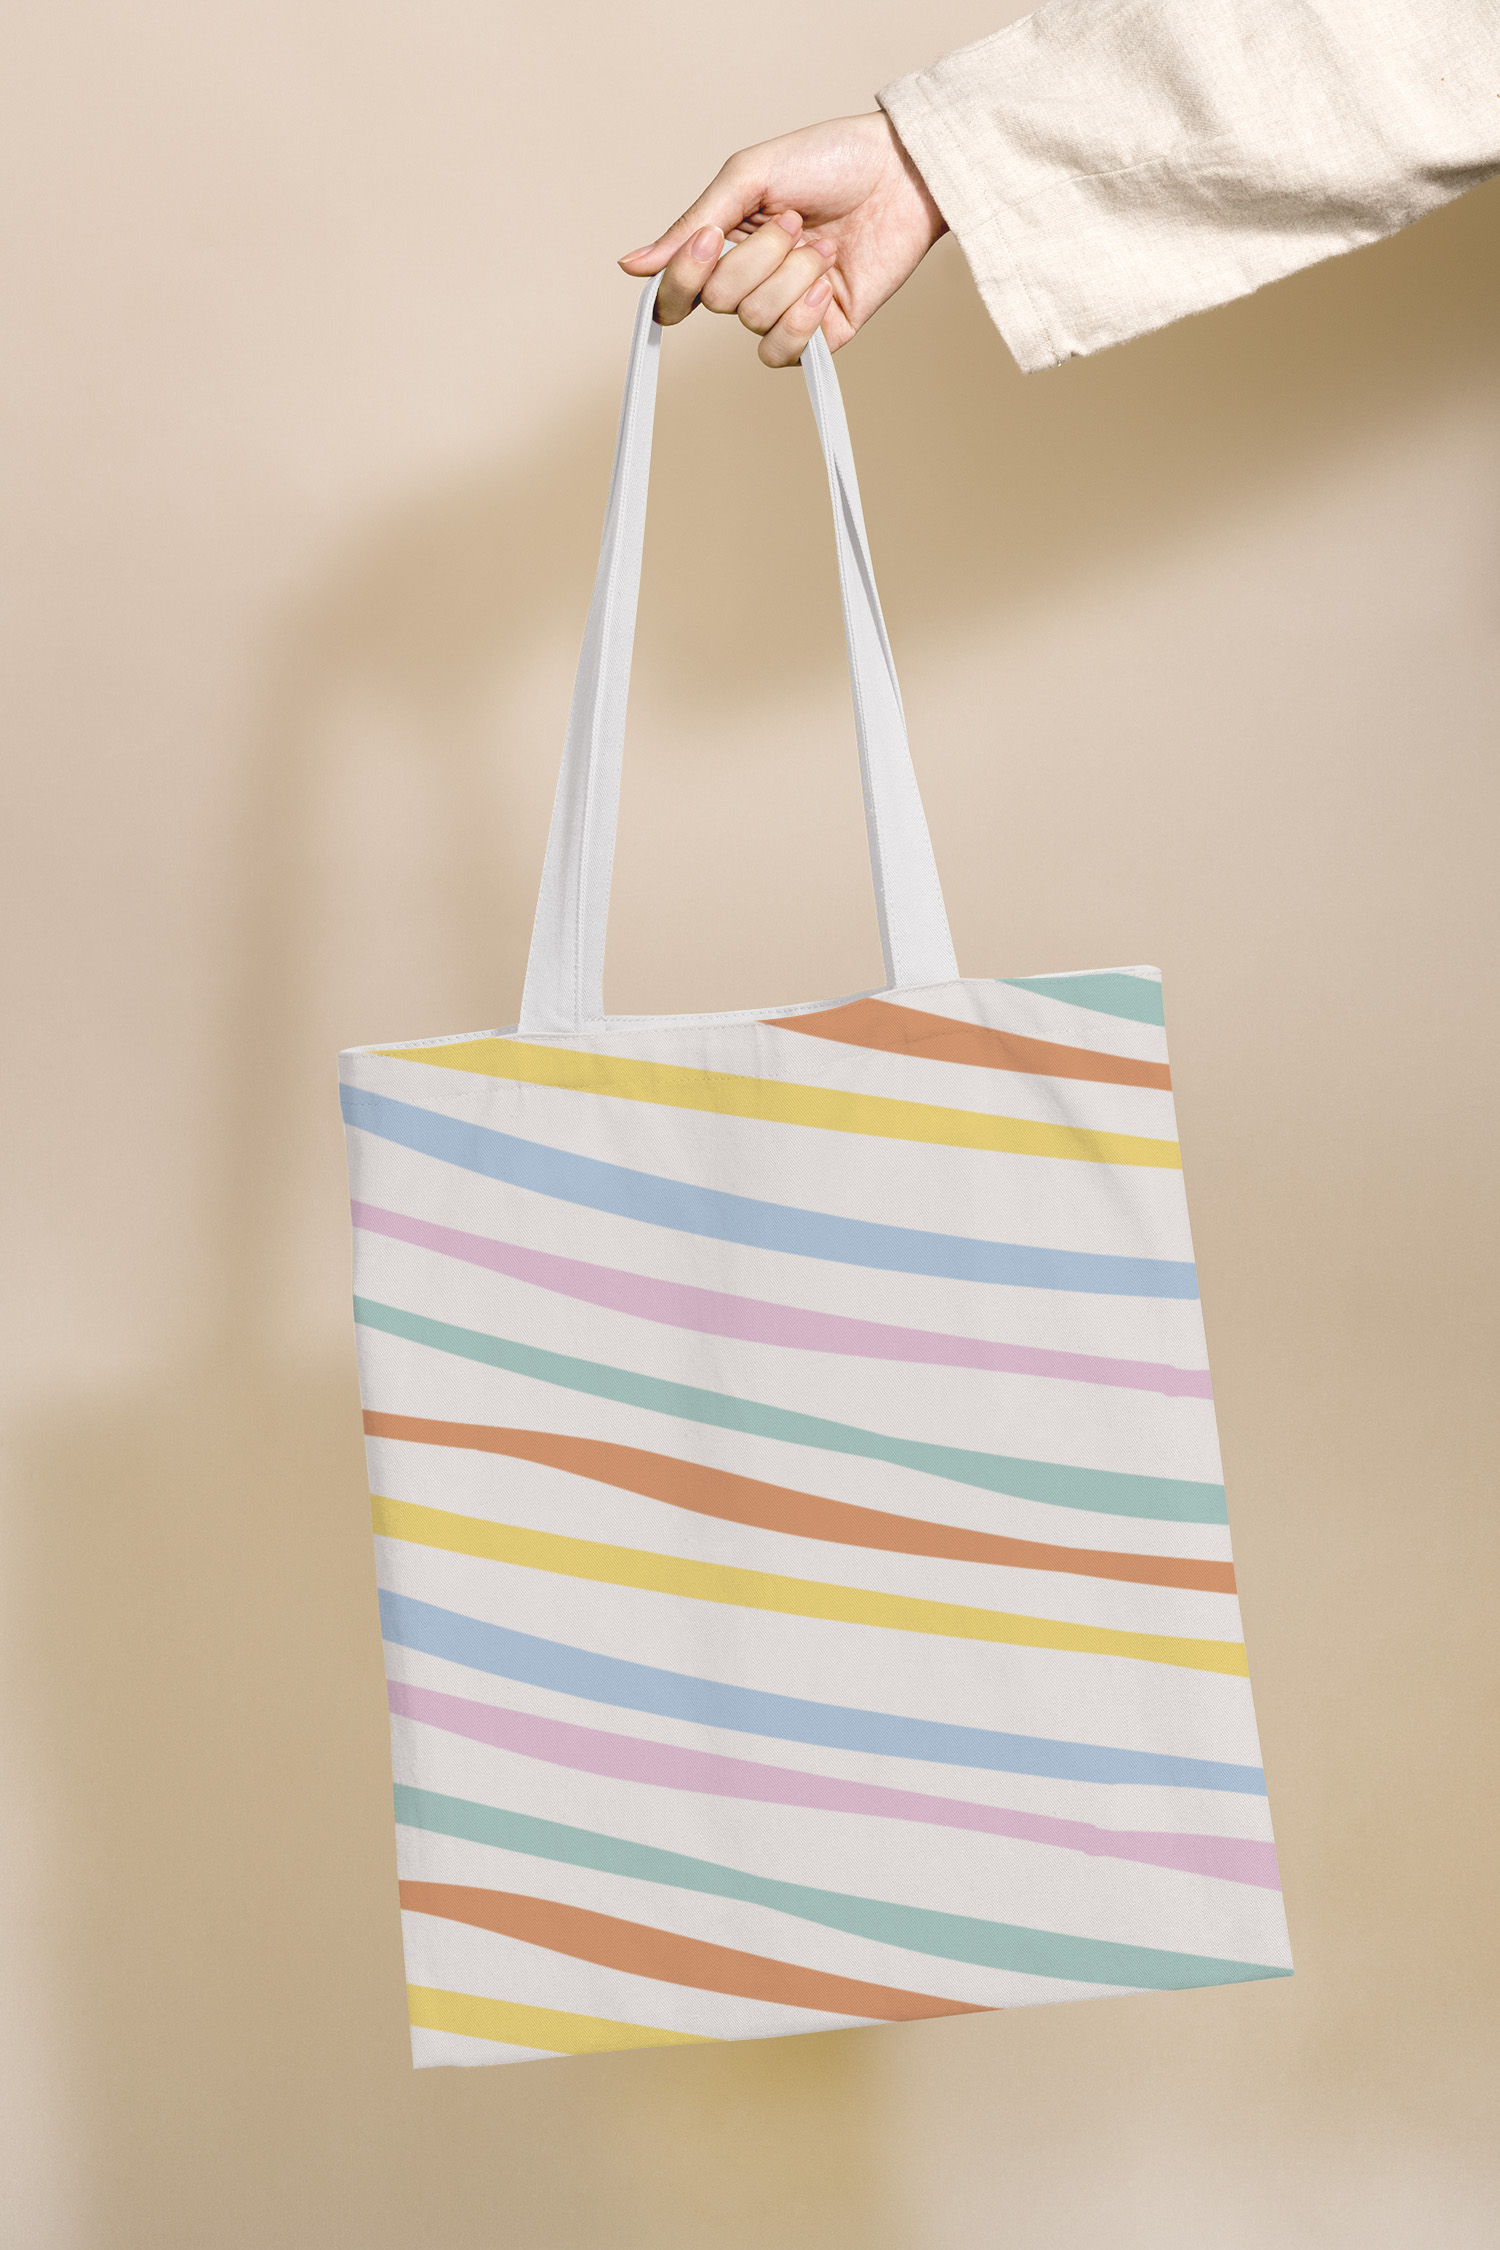 Tote Bag with Pastel Stripes Free Mockup